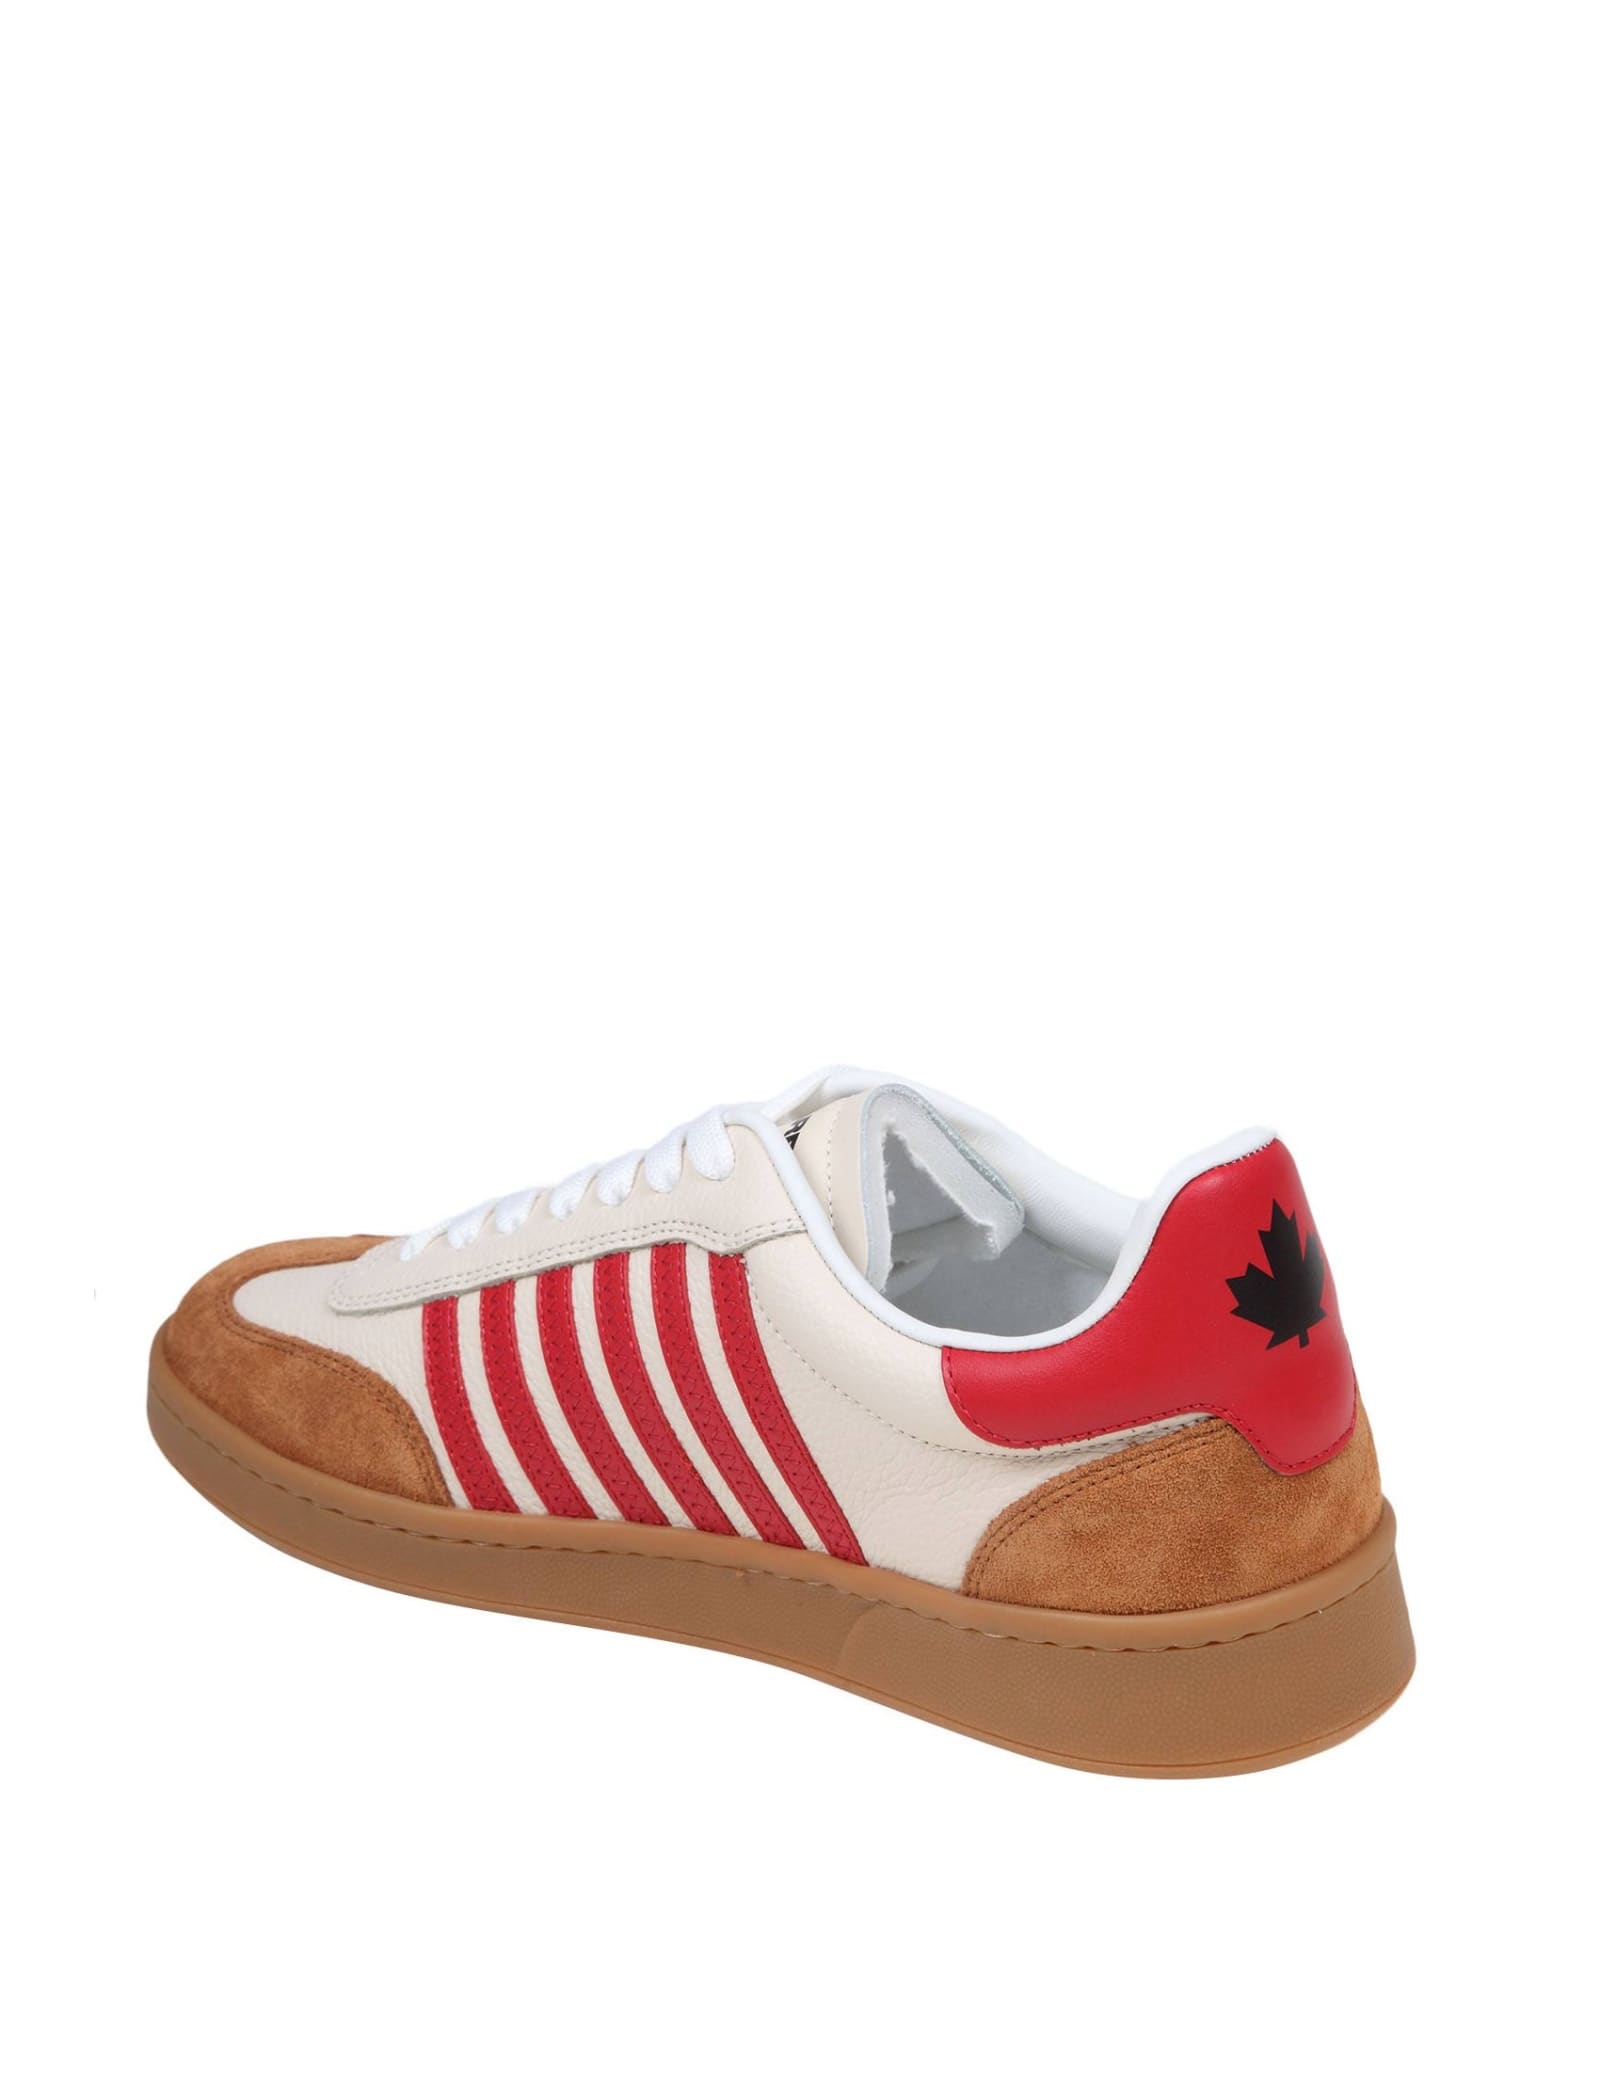 Shop Dsquared2 Boxer Sneakers In White/red Leather And Suede